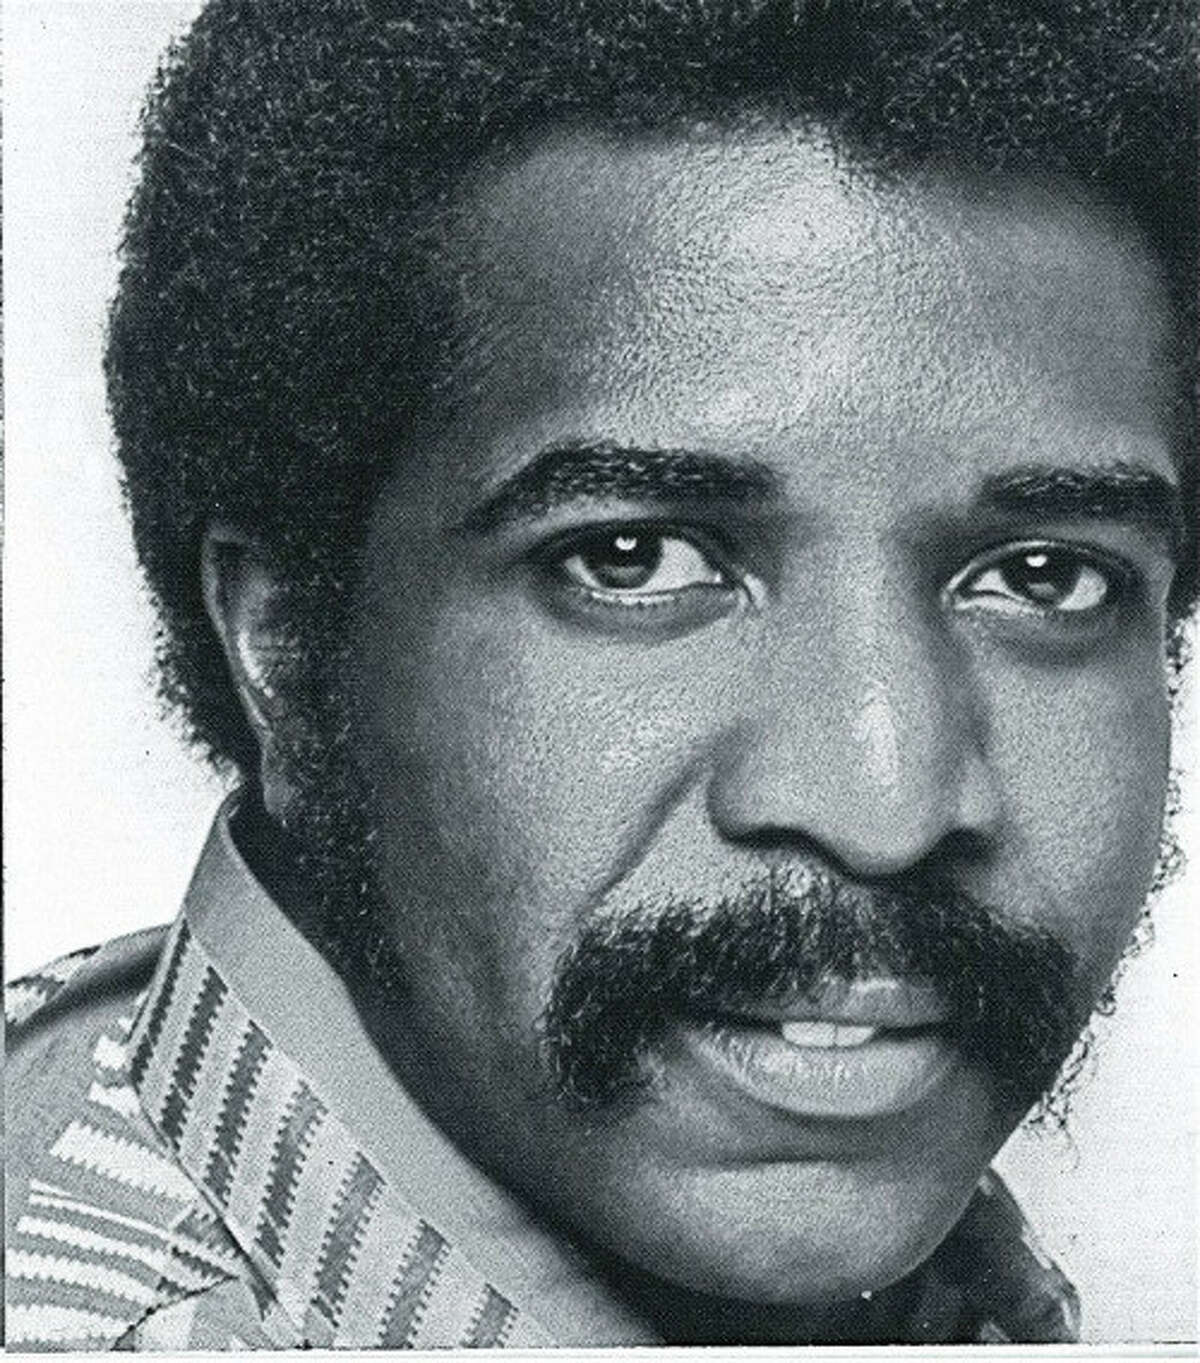 Greg Perry, a singer, songwriter and record producer, wrote and produced many hits for soul artists in the 1970s. He went to Alton High School and grew up within four blocks of James H. Killion Park in Alton.